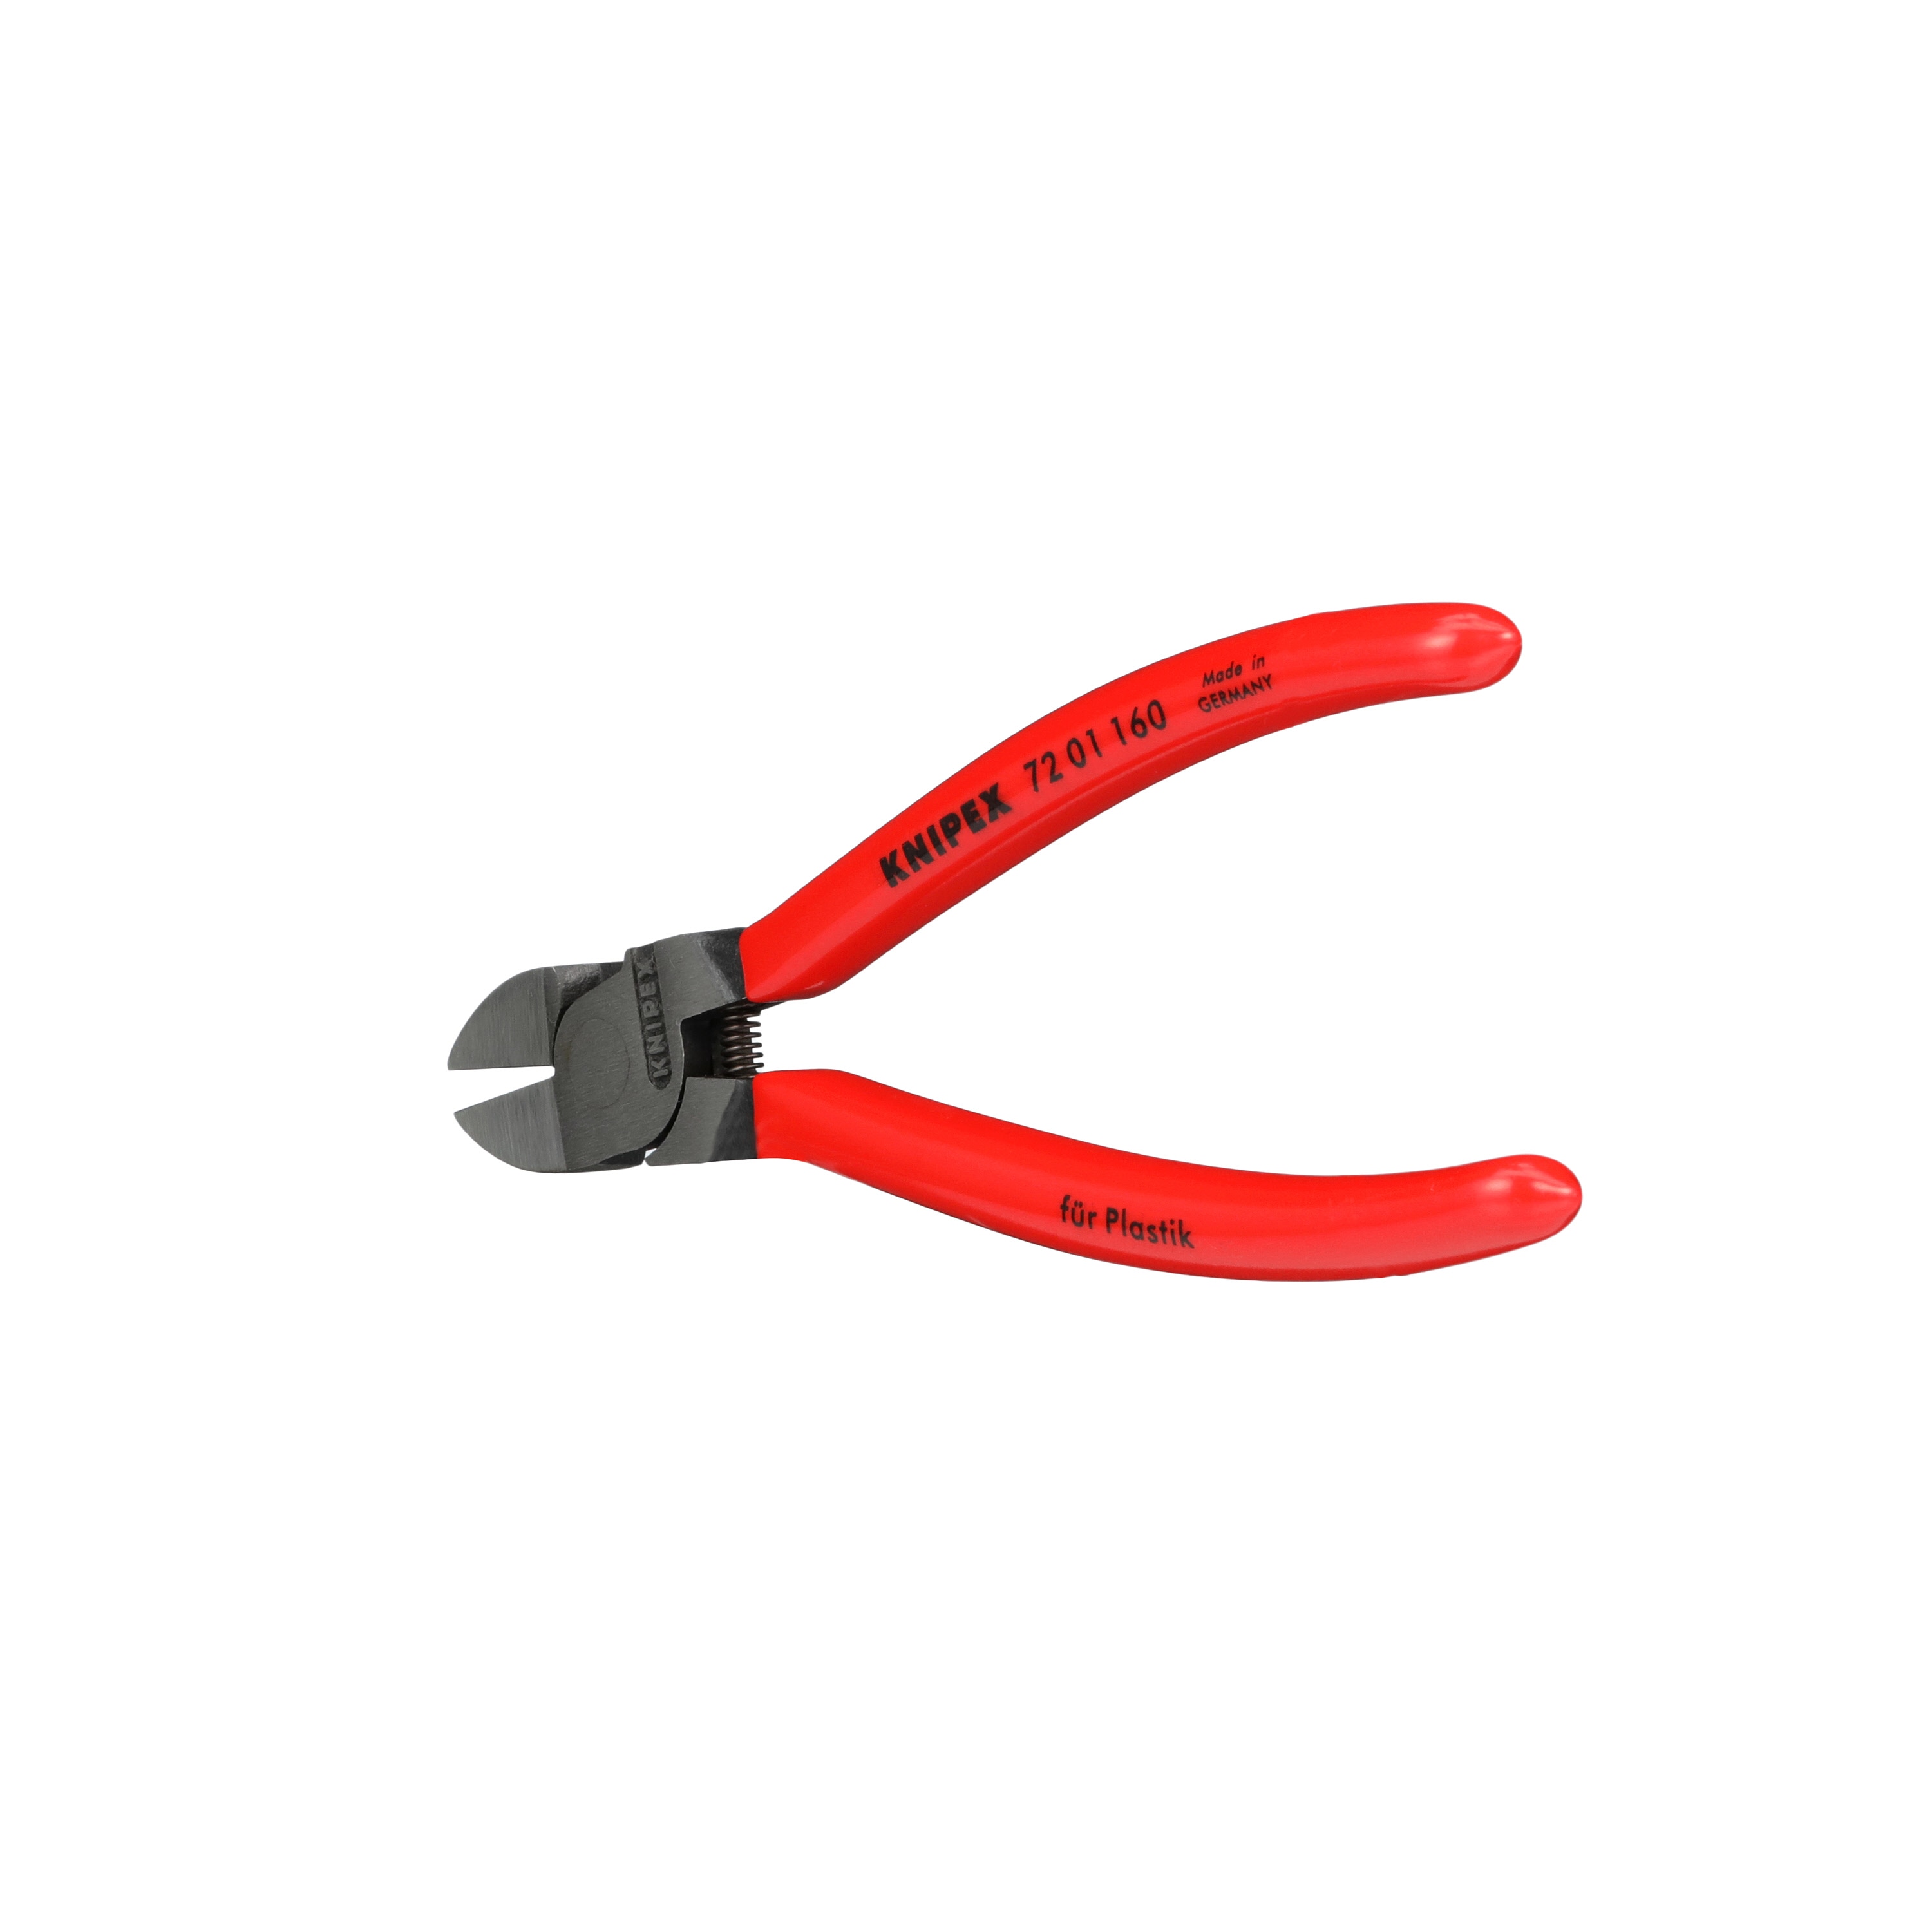 KNIPEX Flush Cutting in the Cutting Pliers department at Lowes.com